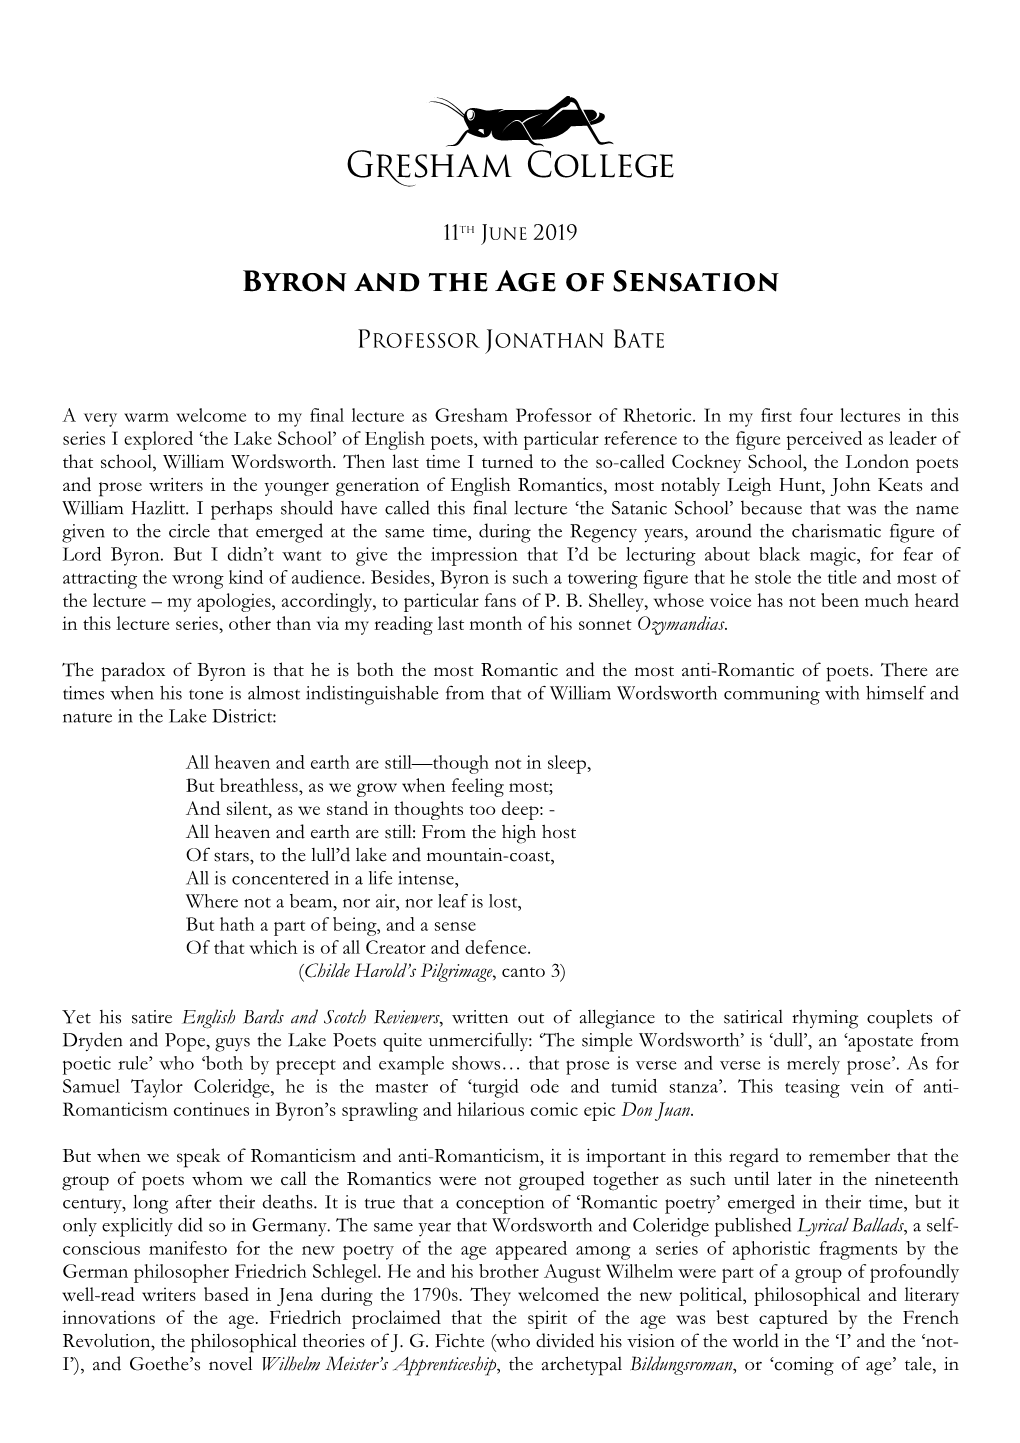 Byron and the Age of Sensation